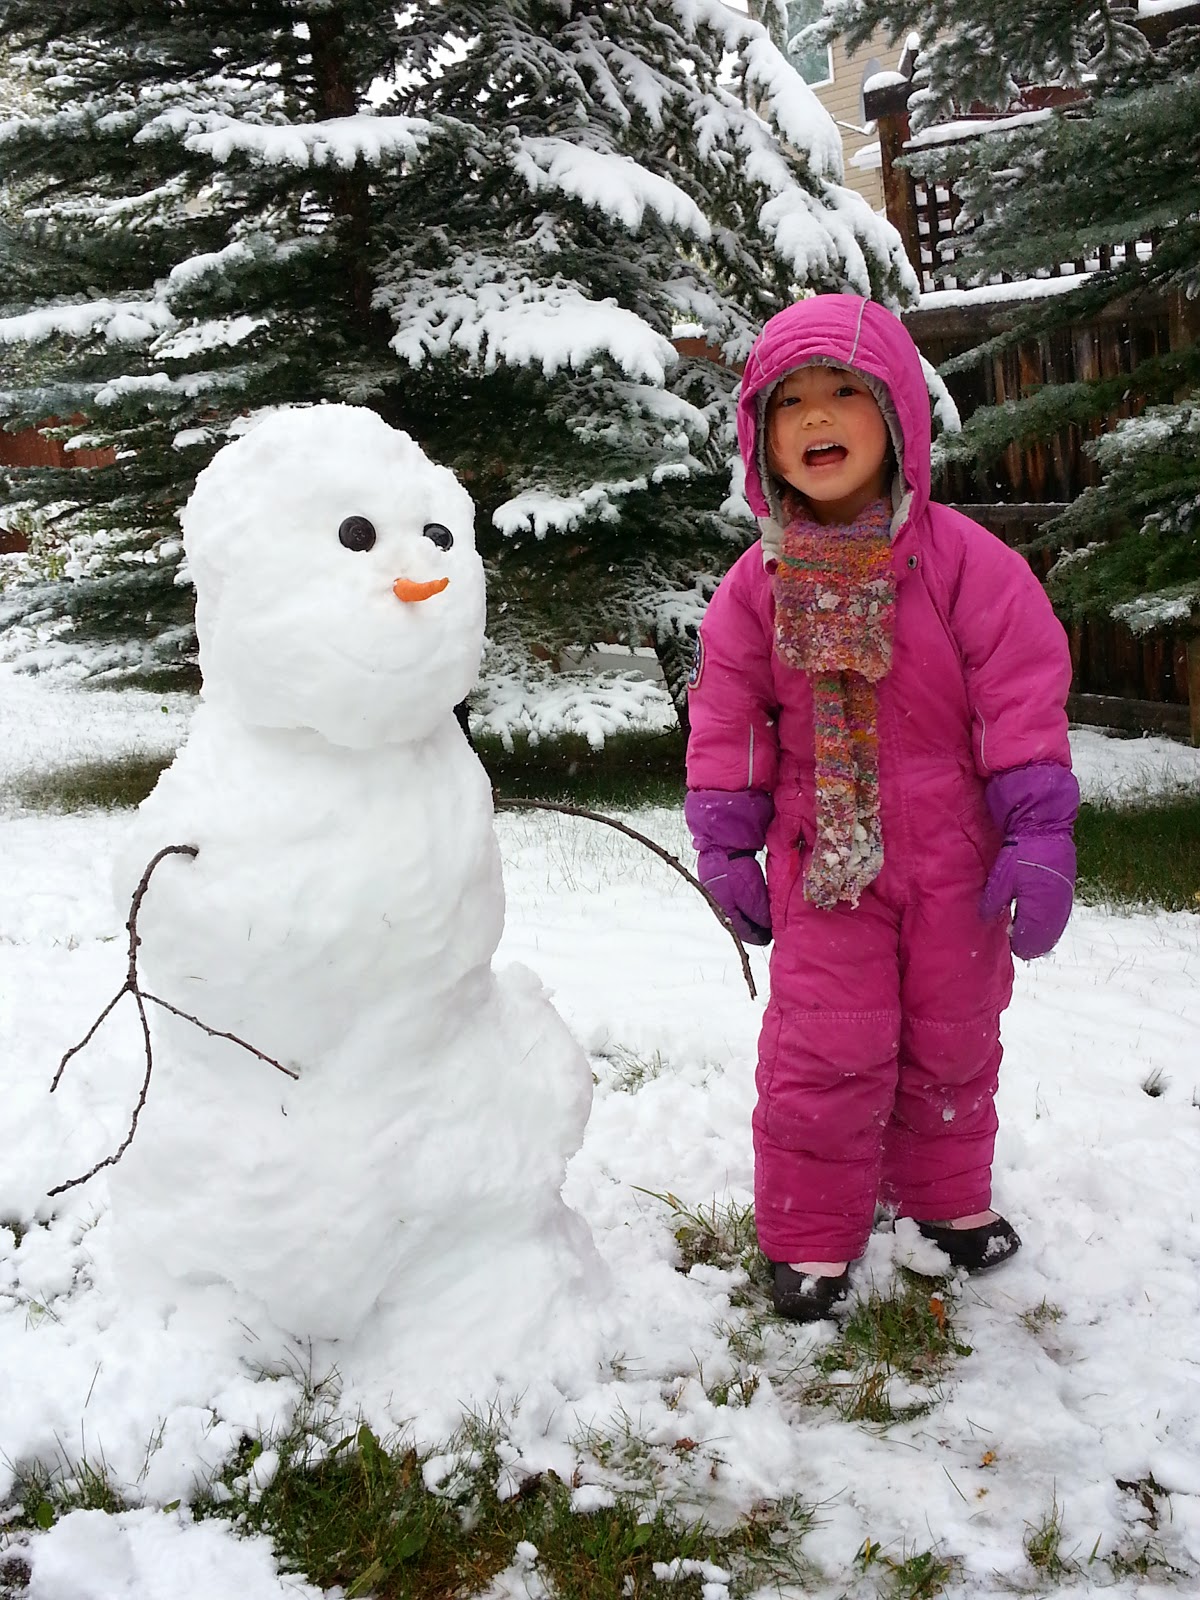 Snow Fun For Everyone Real Life Snow Fun Play Outside Guide